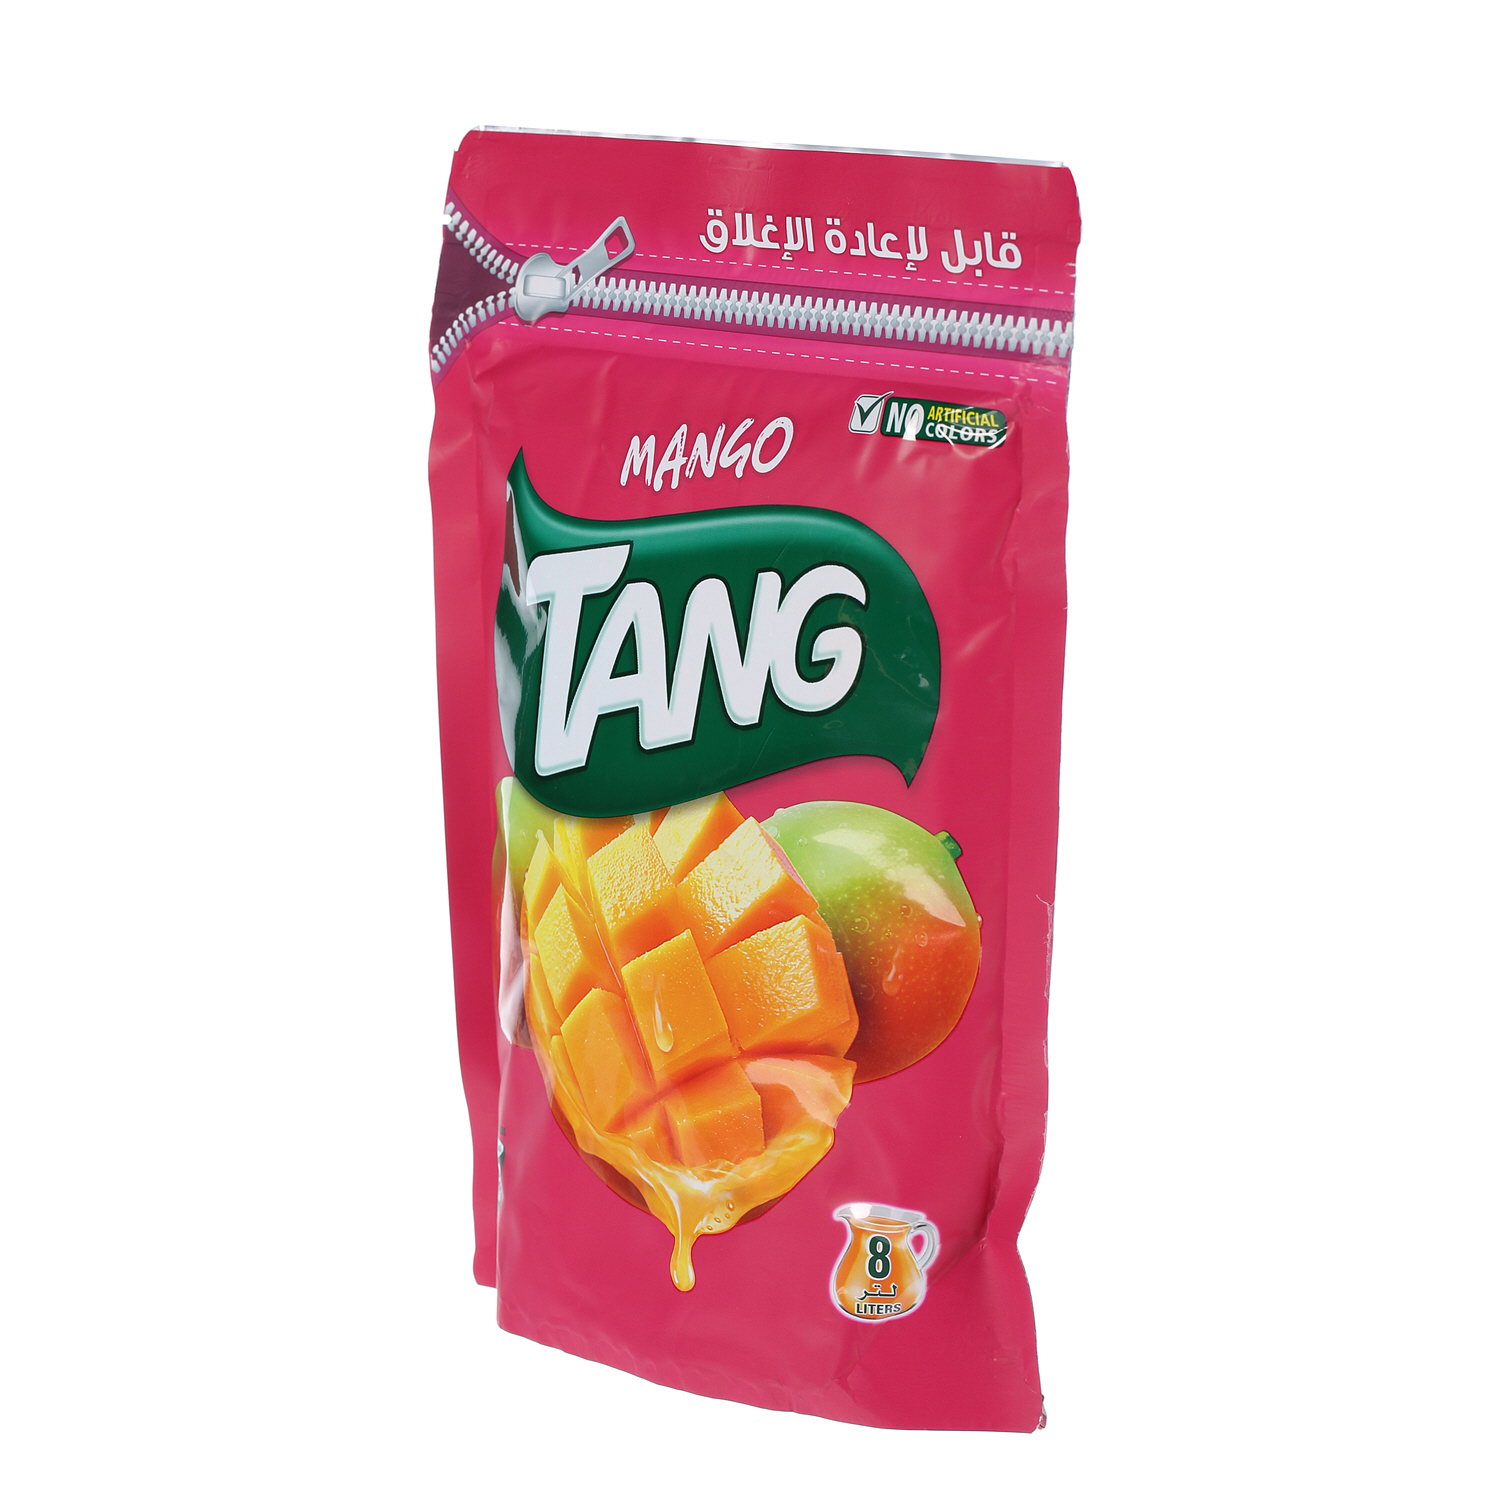 Tang Instant Drink Mango Pouch 1Kg